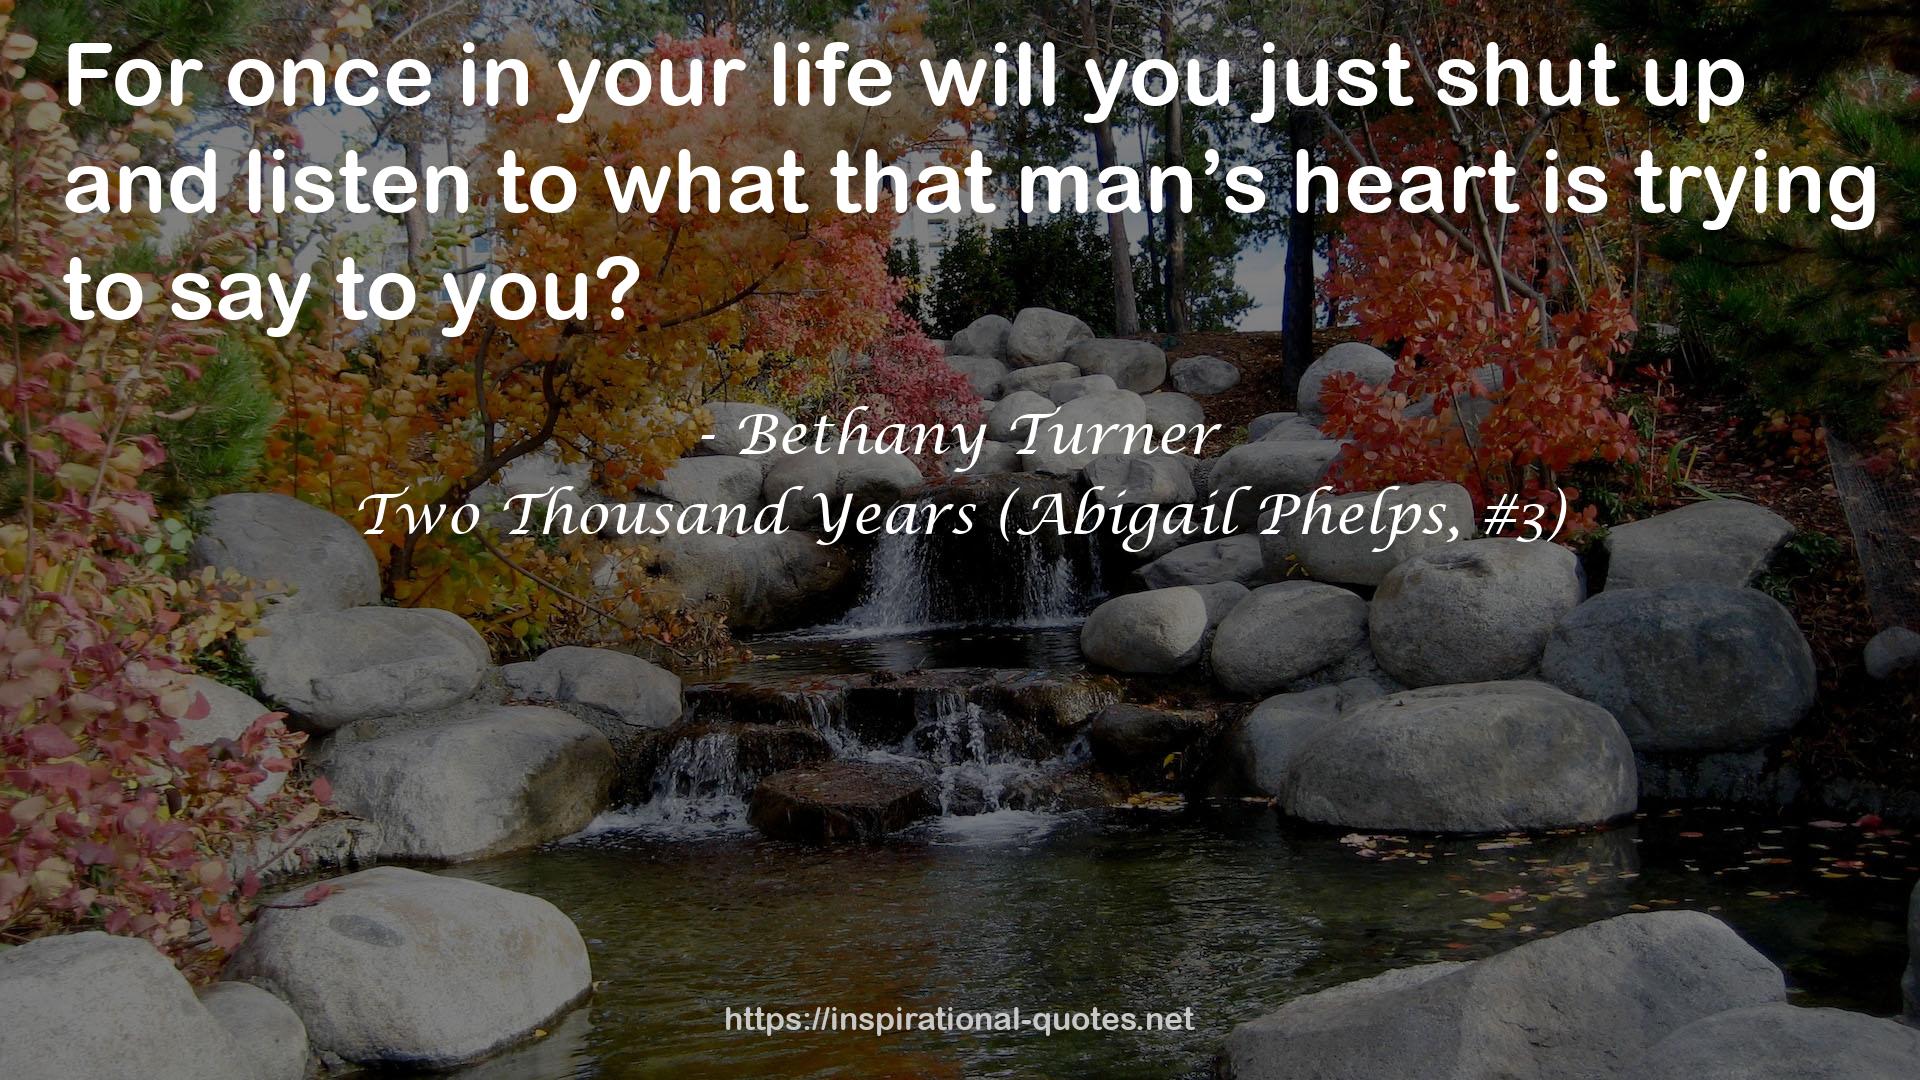 Two Thousand Years (Abigail Phelps, #3) QUOTES